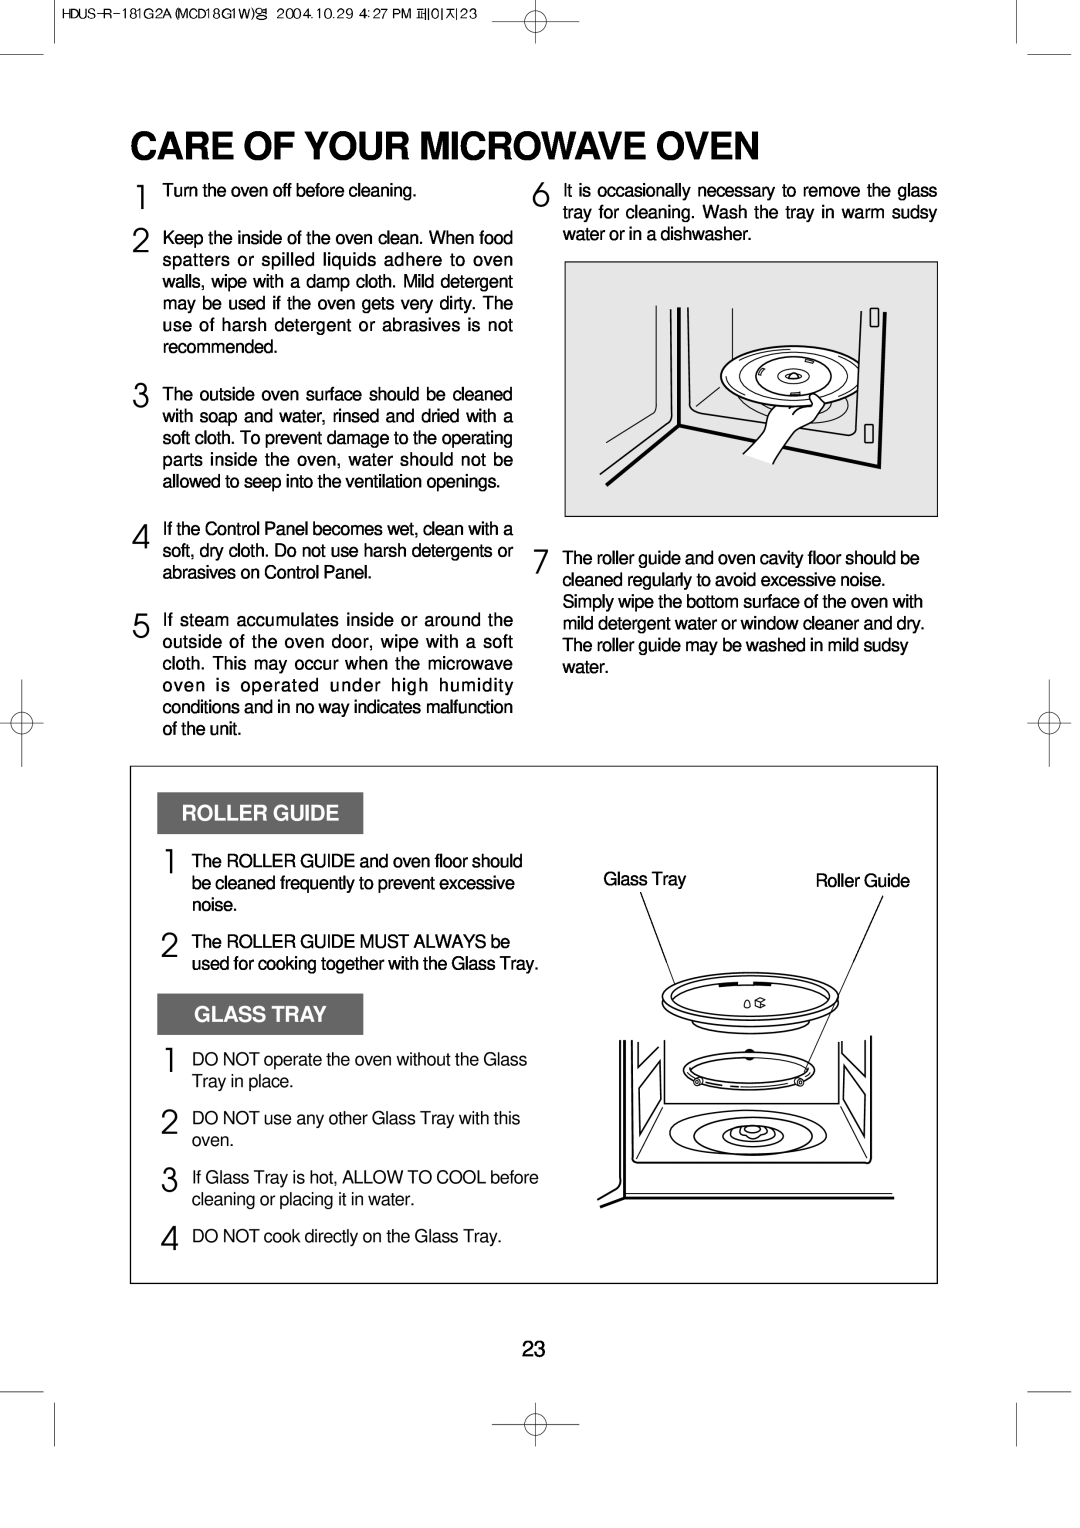 Magic Chef MCD18G1W instruction manual Care Of Your Microwave Oven, Roller Guide, Glass Tray 